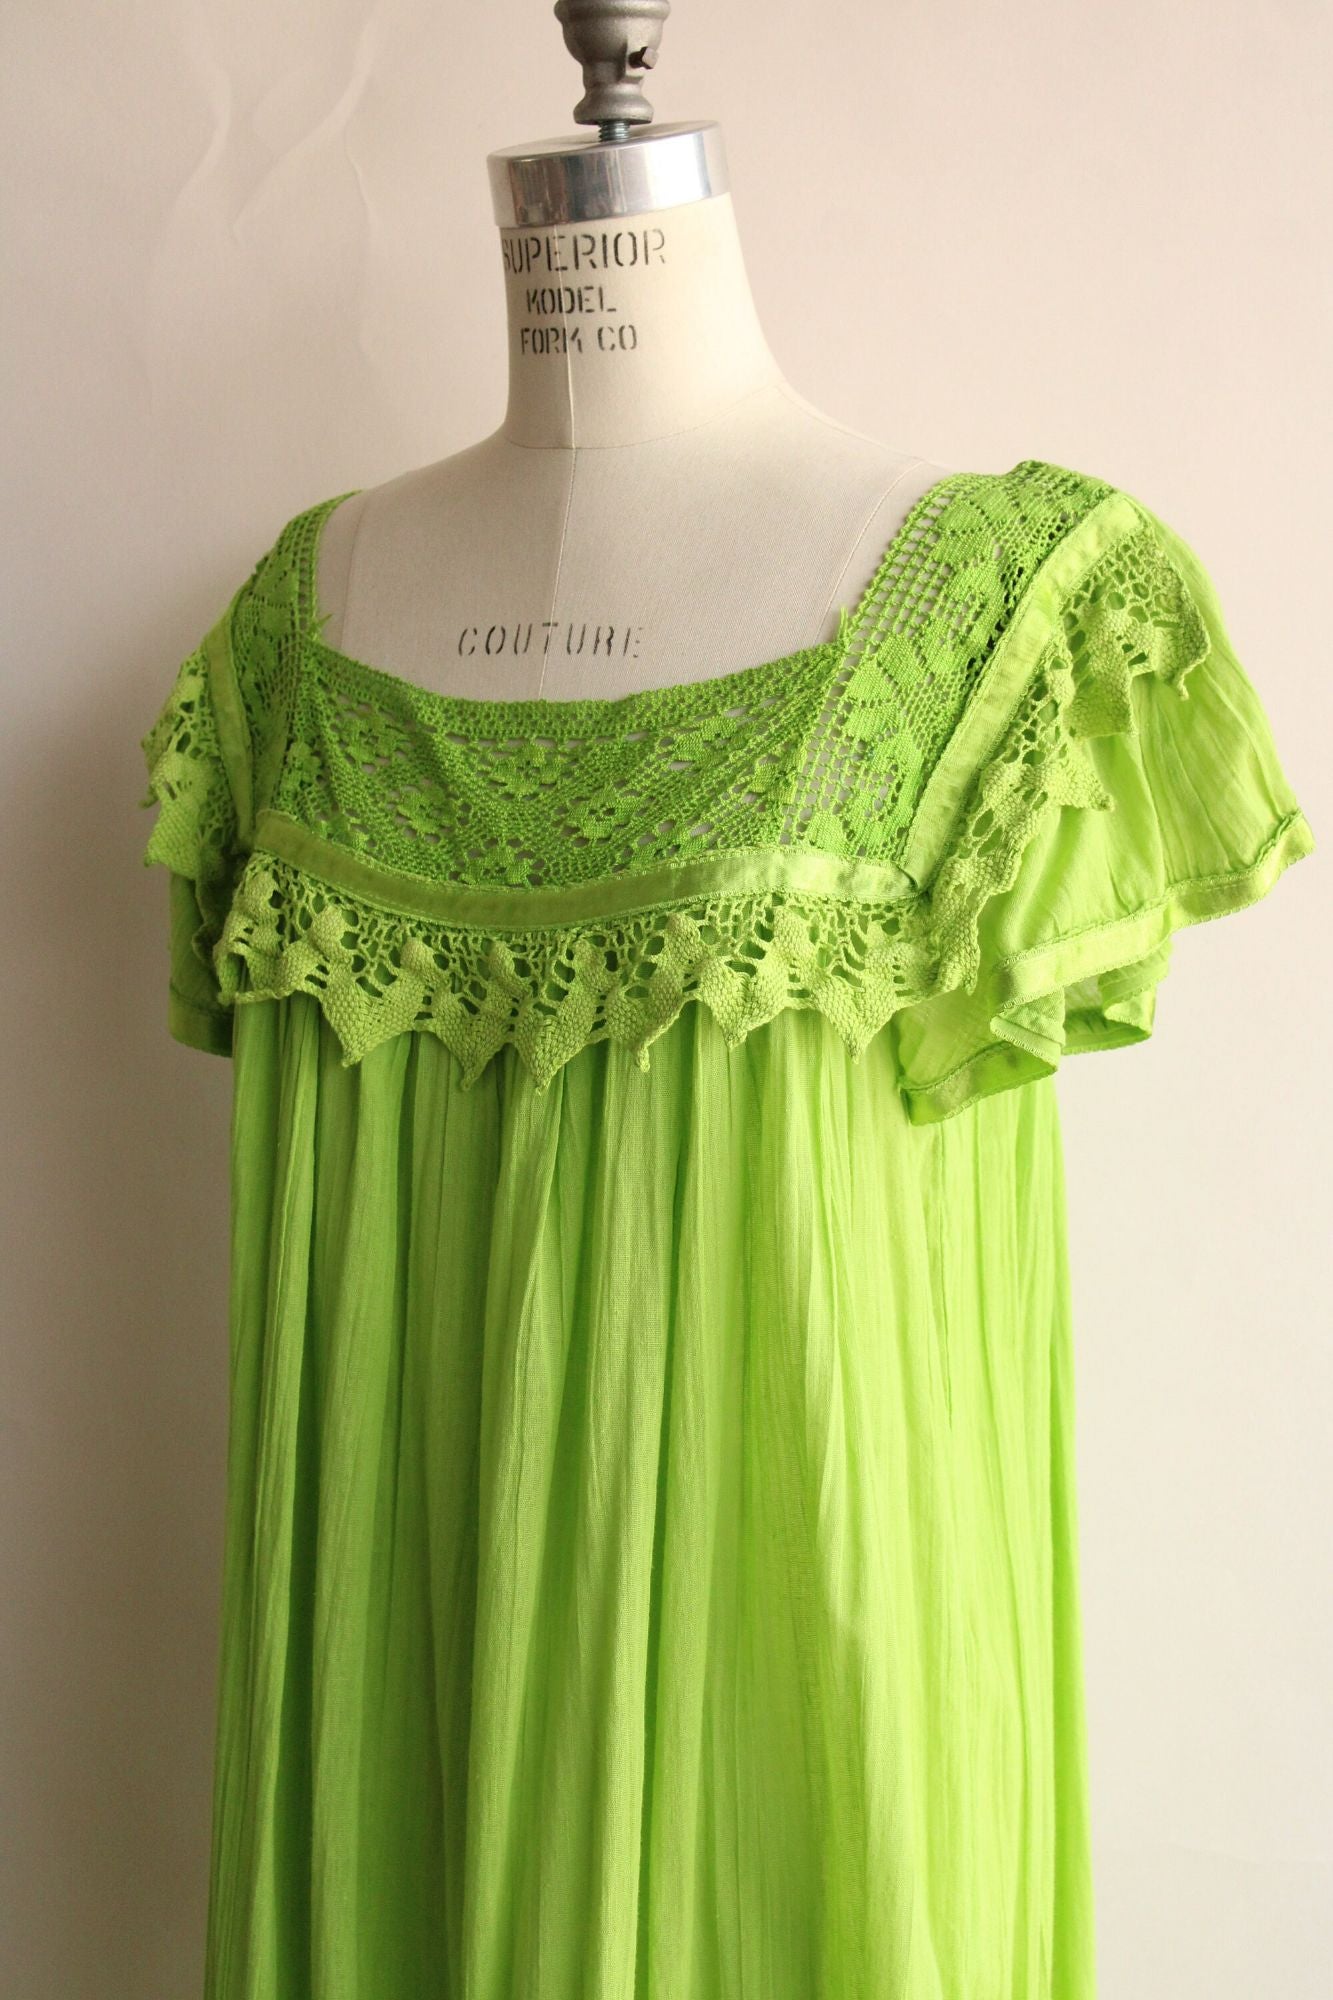 Vintage 1970s 1980s Apple Green Peasant Dress with Crochet Lace Trim